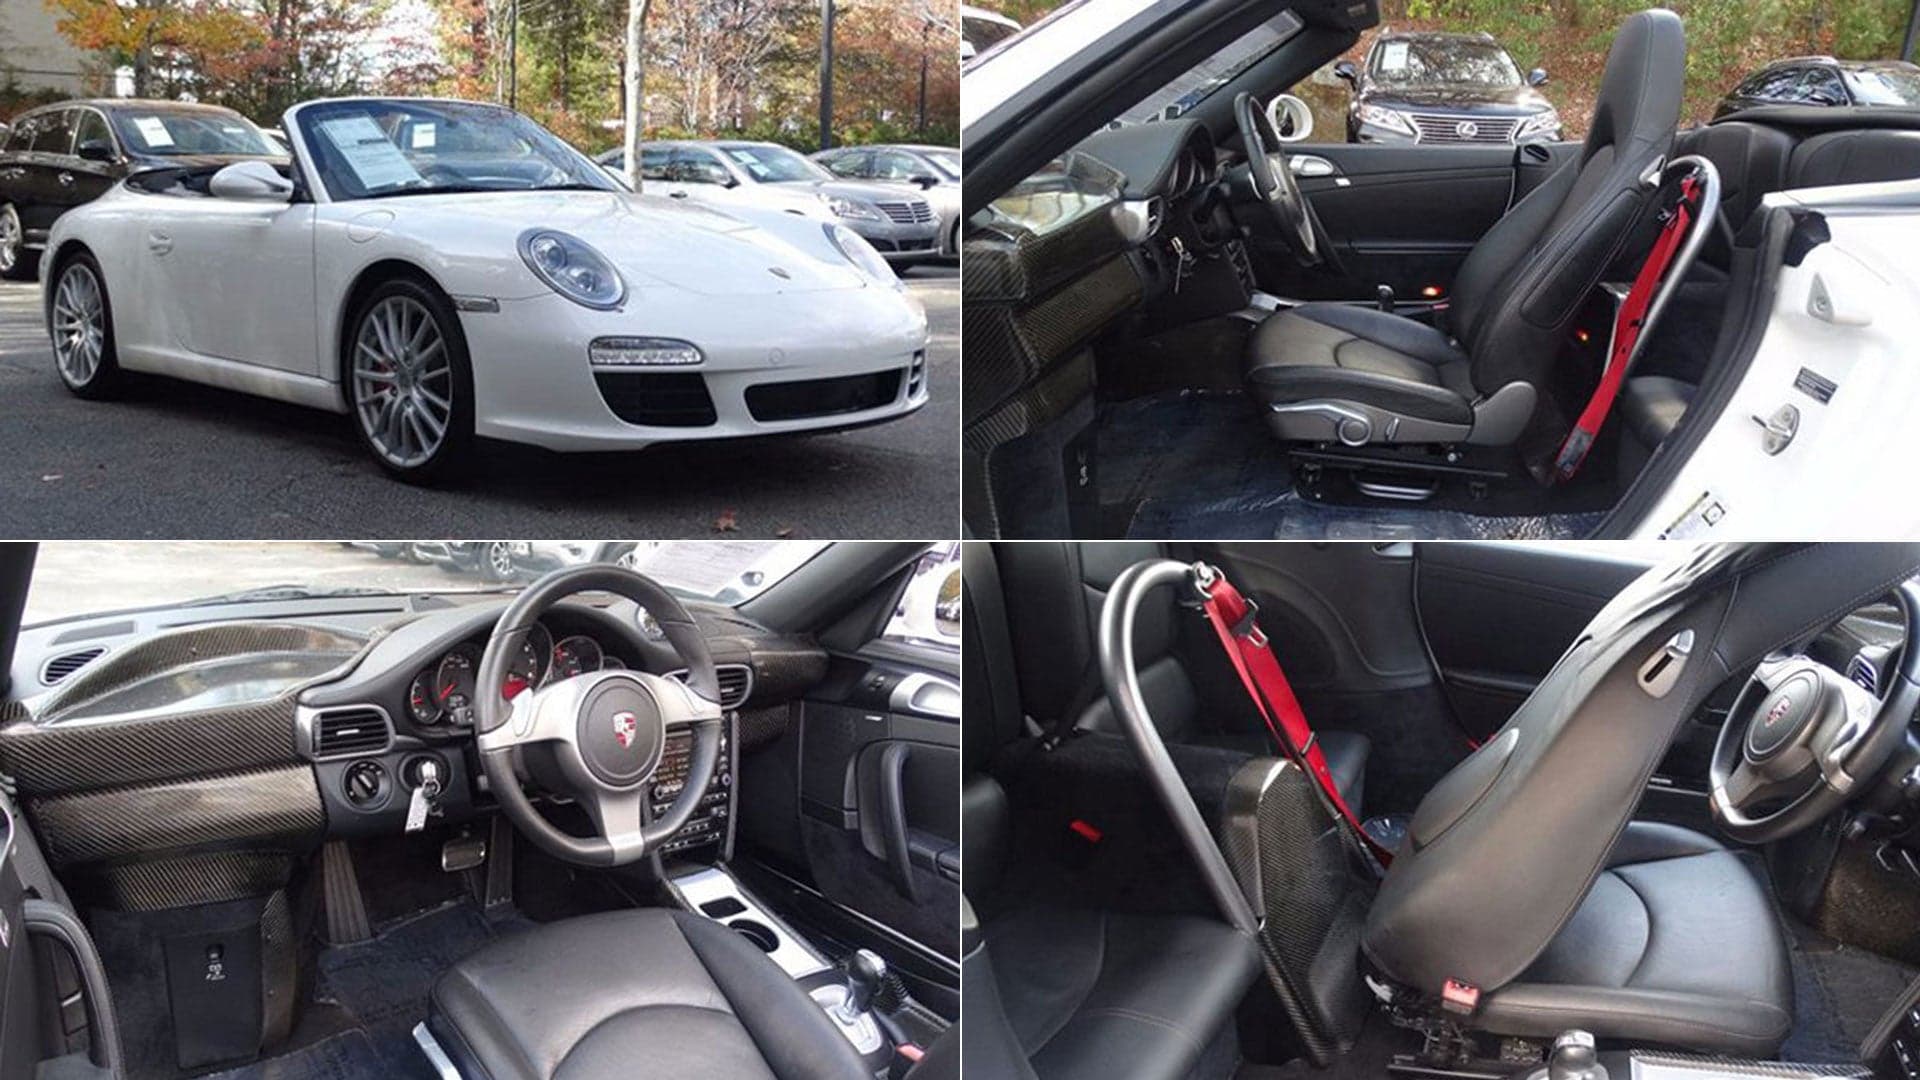 This Single-Seat Porsche 911 Cabriolet Is on Sale in Georgia Right Now